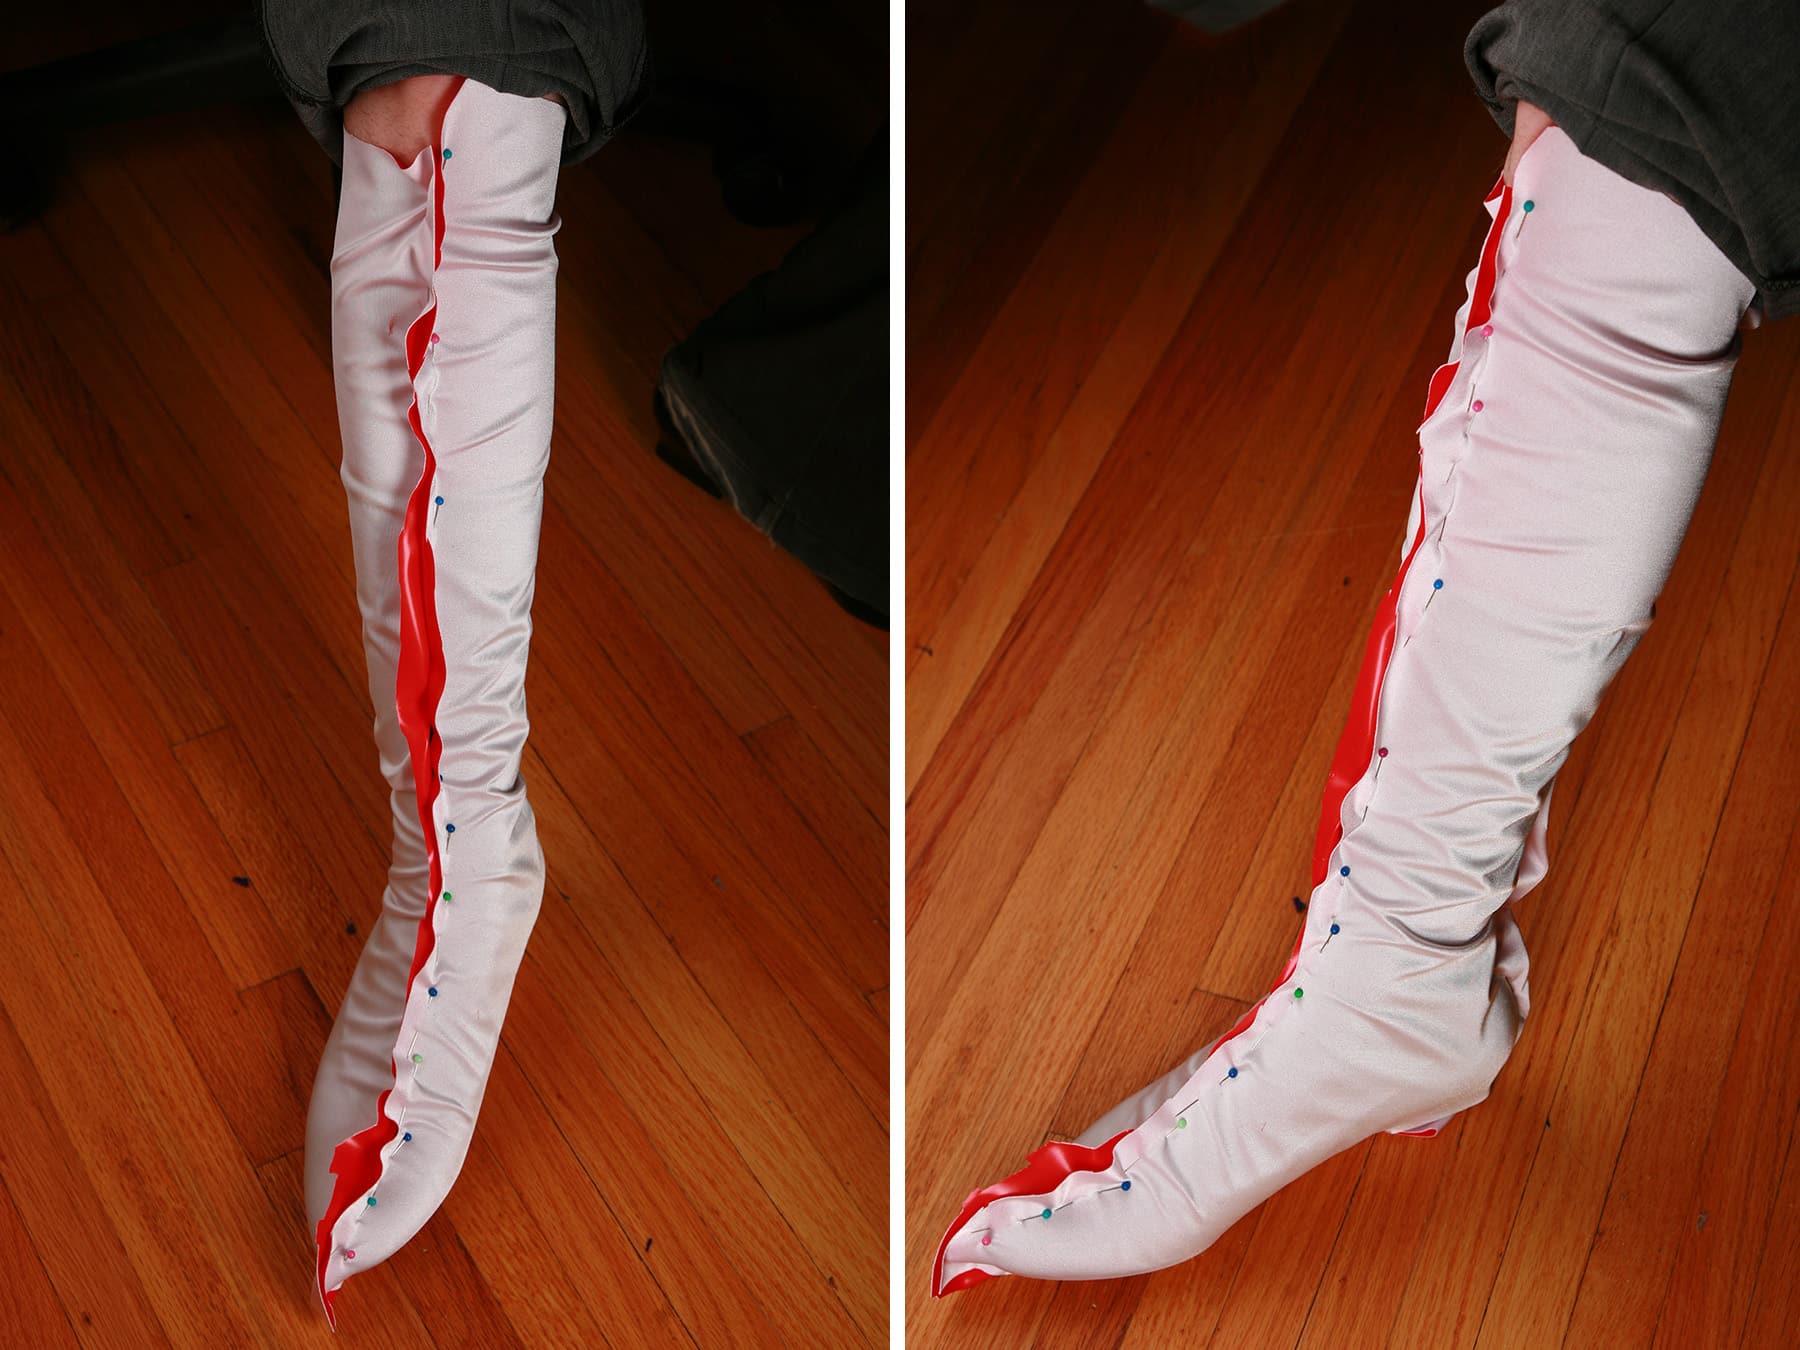 A two photo compilation image showing white fabric being pinned in place on a person's lower leg, from two views.